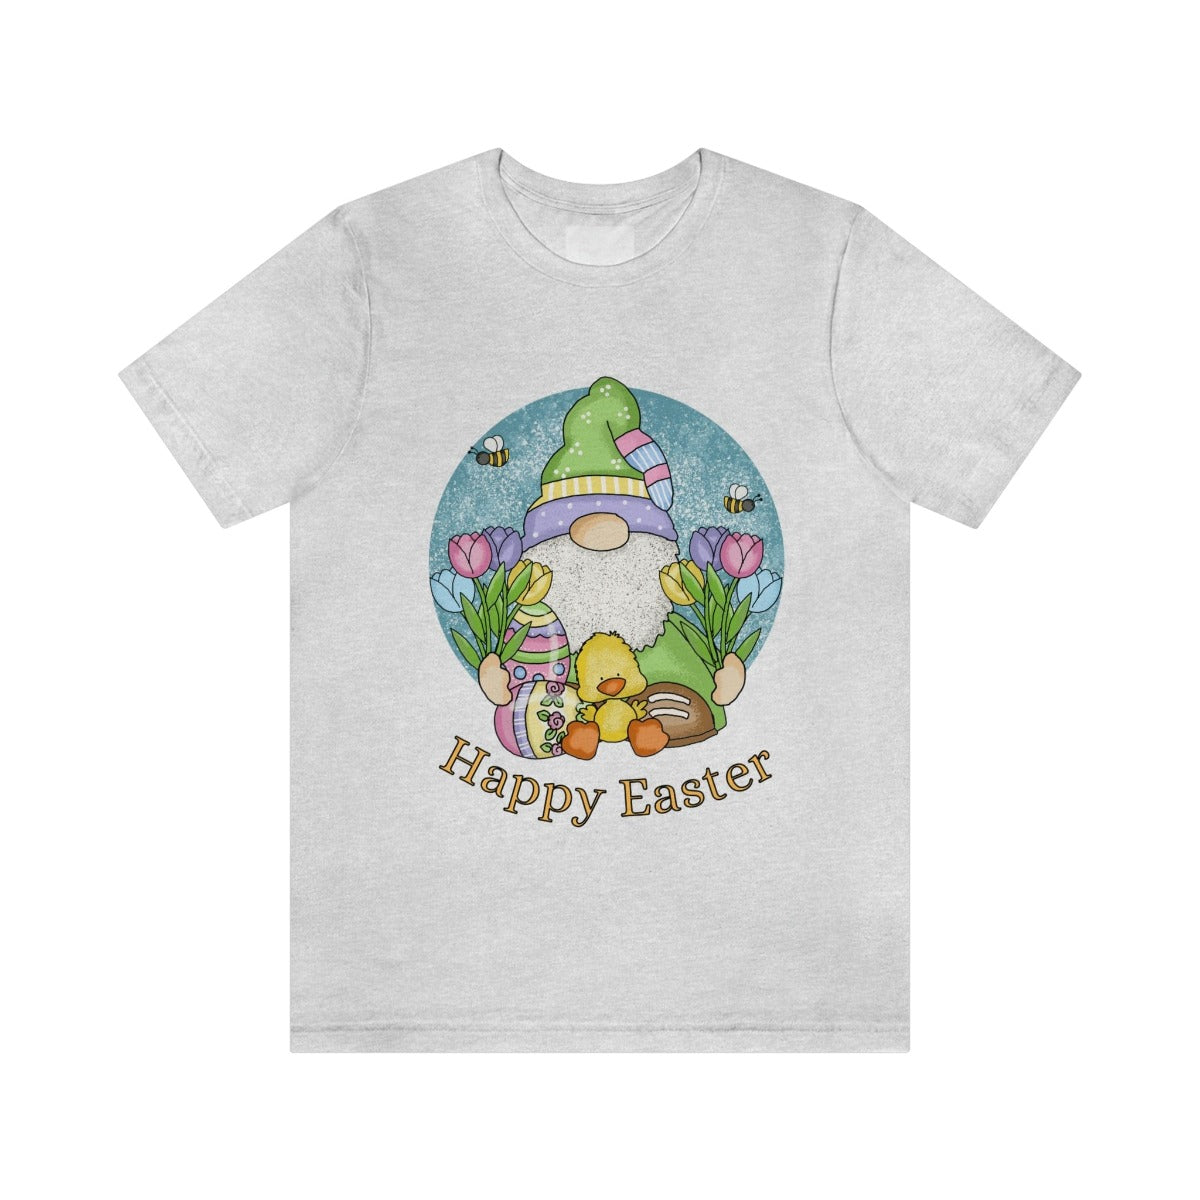 Printify T-Shirt Ash / S Woman's shirt, Happy Easter Shirt, Gnome Shirt, Easter Shirt, Unisex Short Sleeve Tee, Graphic Tee, Gift for Her 84950319965458021789